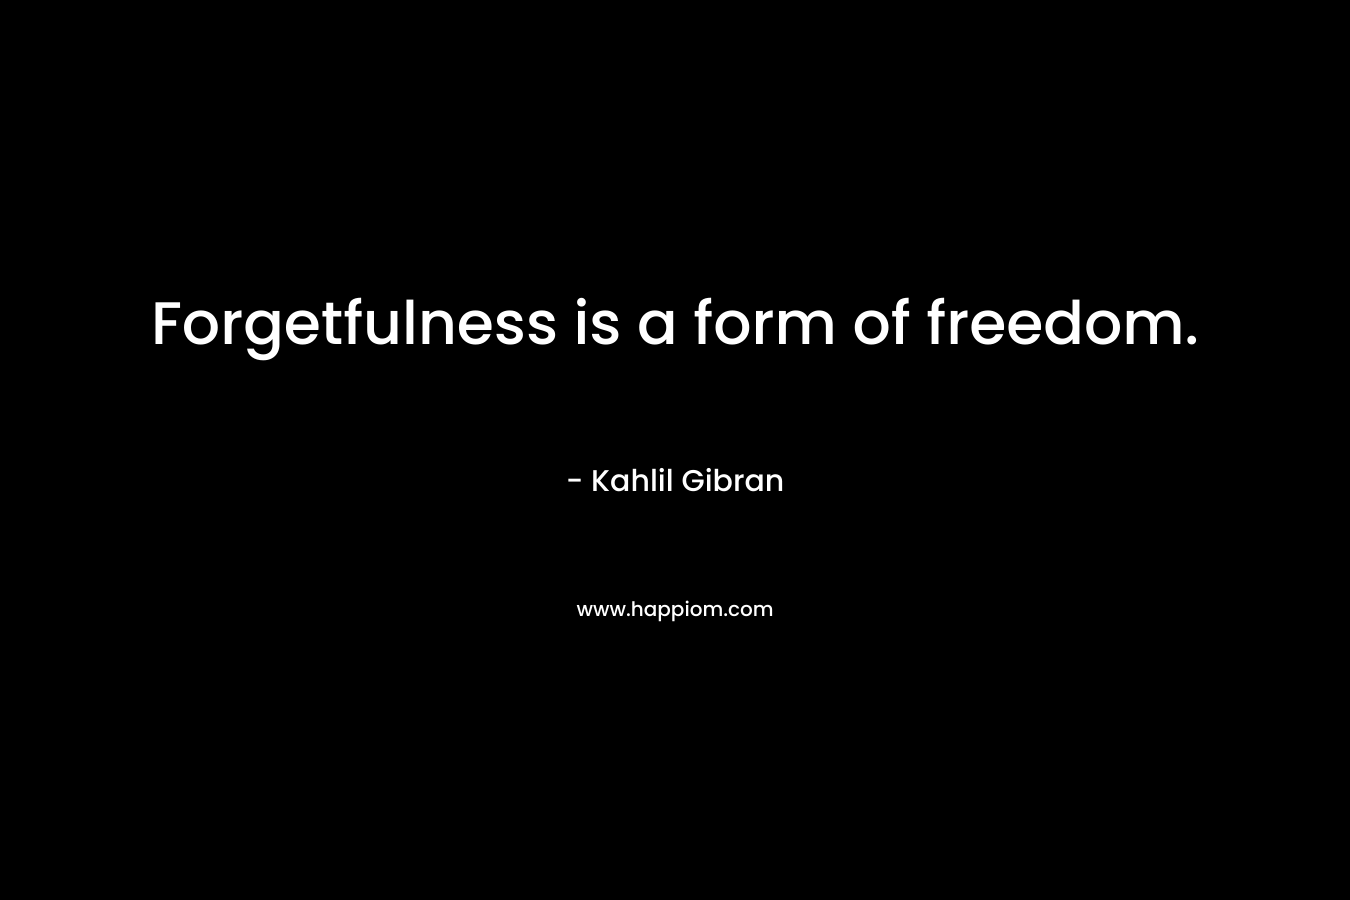 Forgetfulness is a form of freedom. – Kahlil Gibran